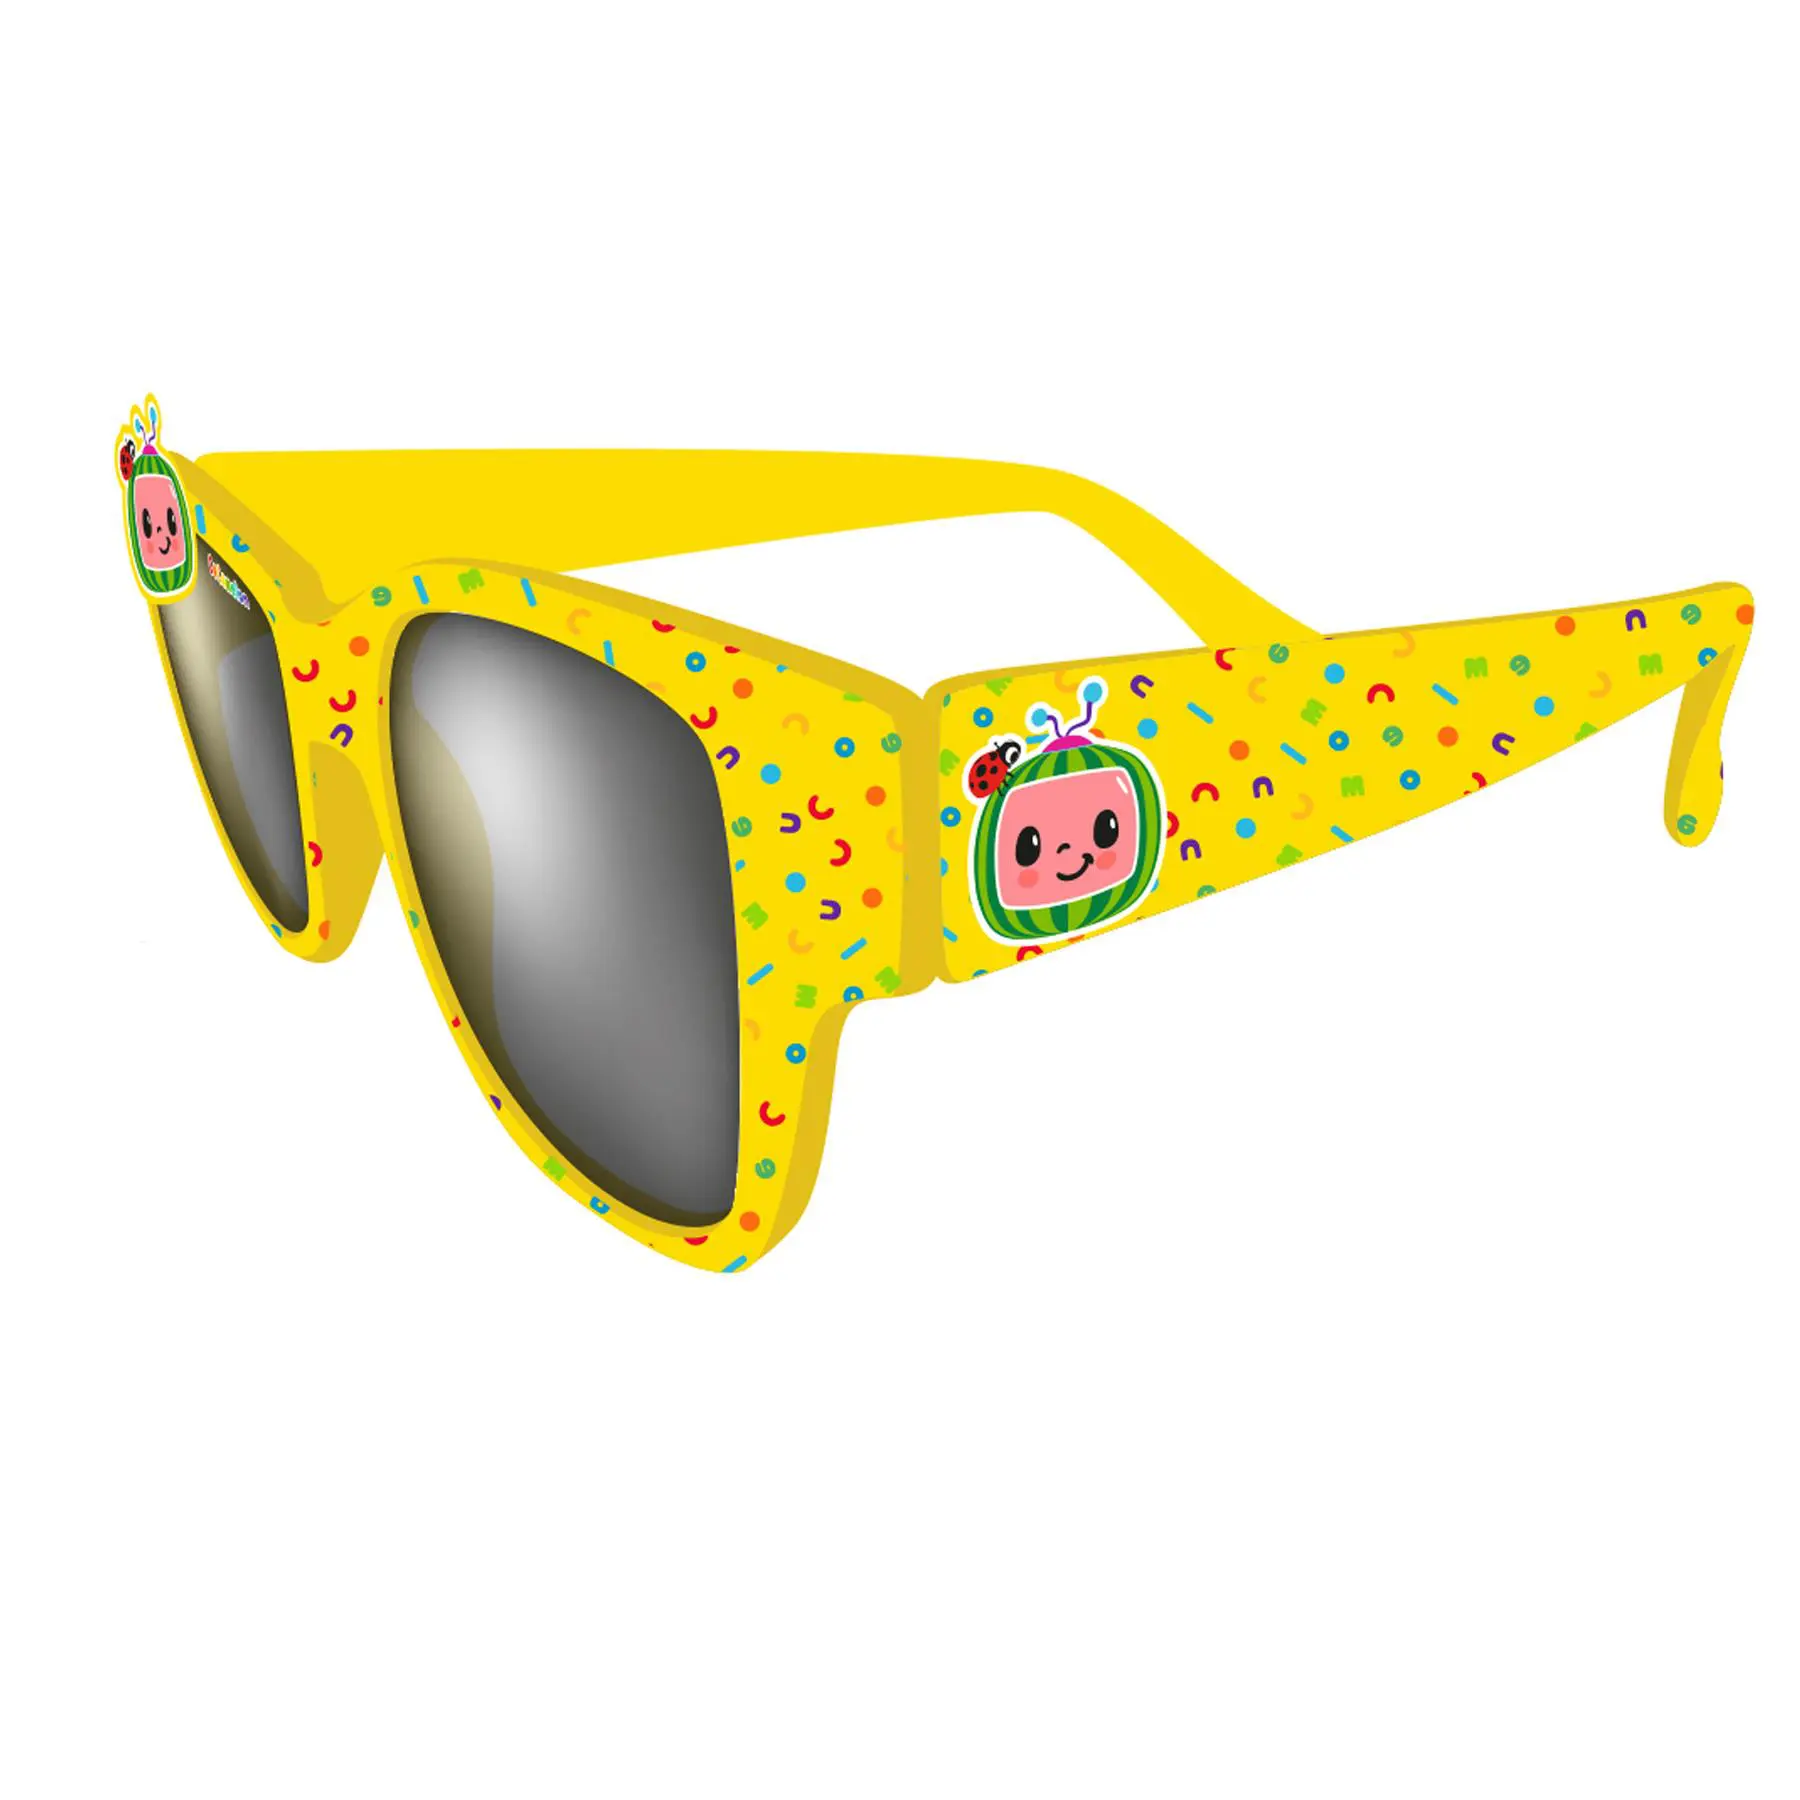 Cocomelon Children's Character Sunglasses UV protection for Holiday - Yellow COCOM1